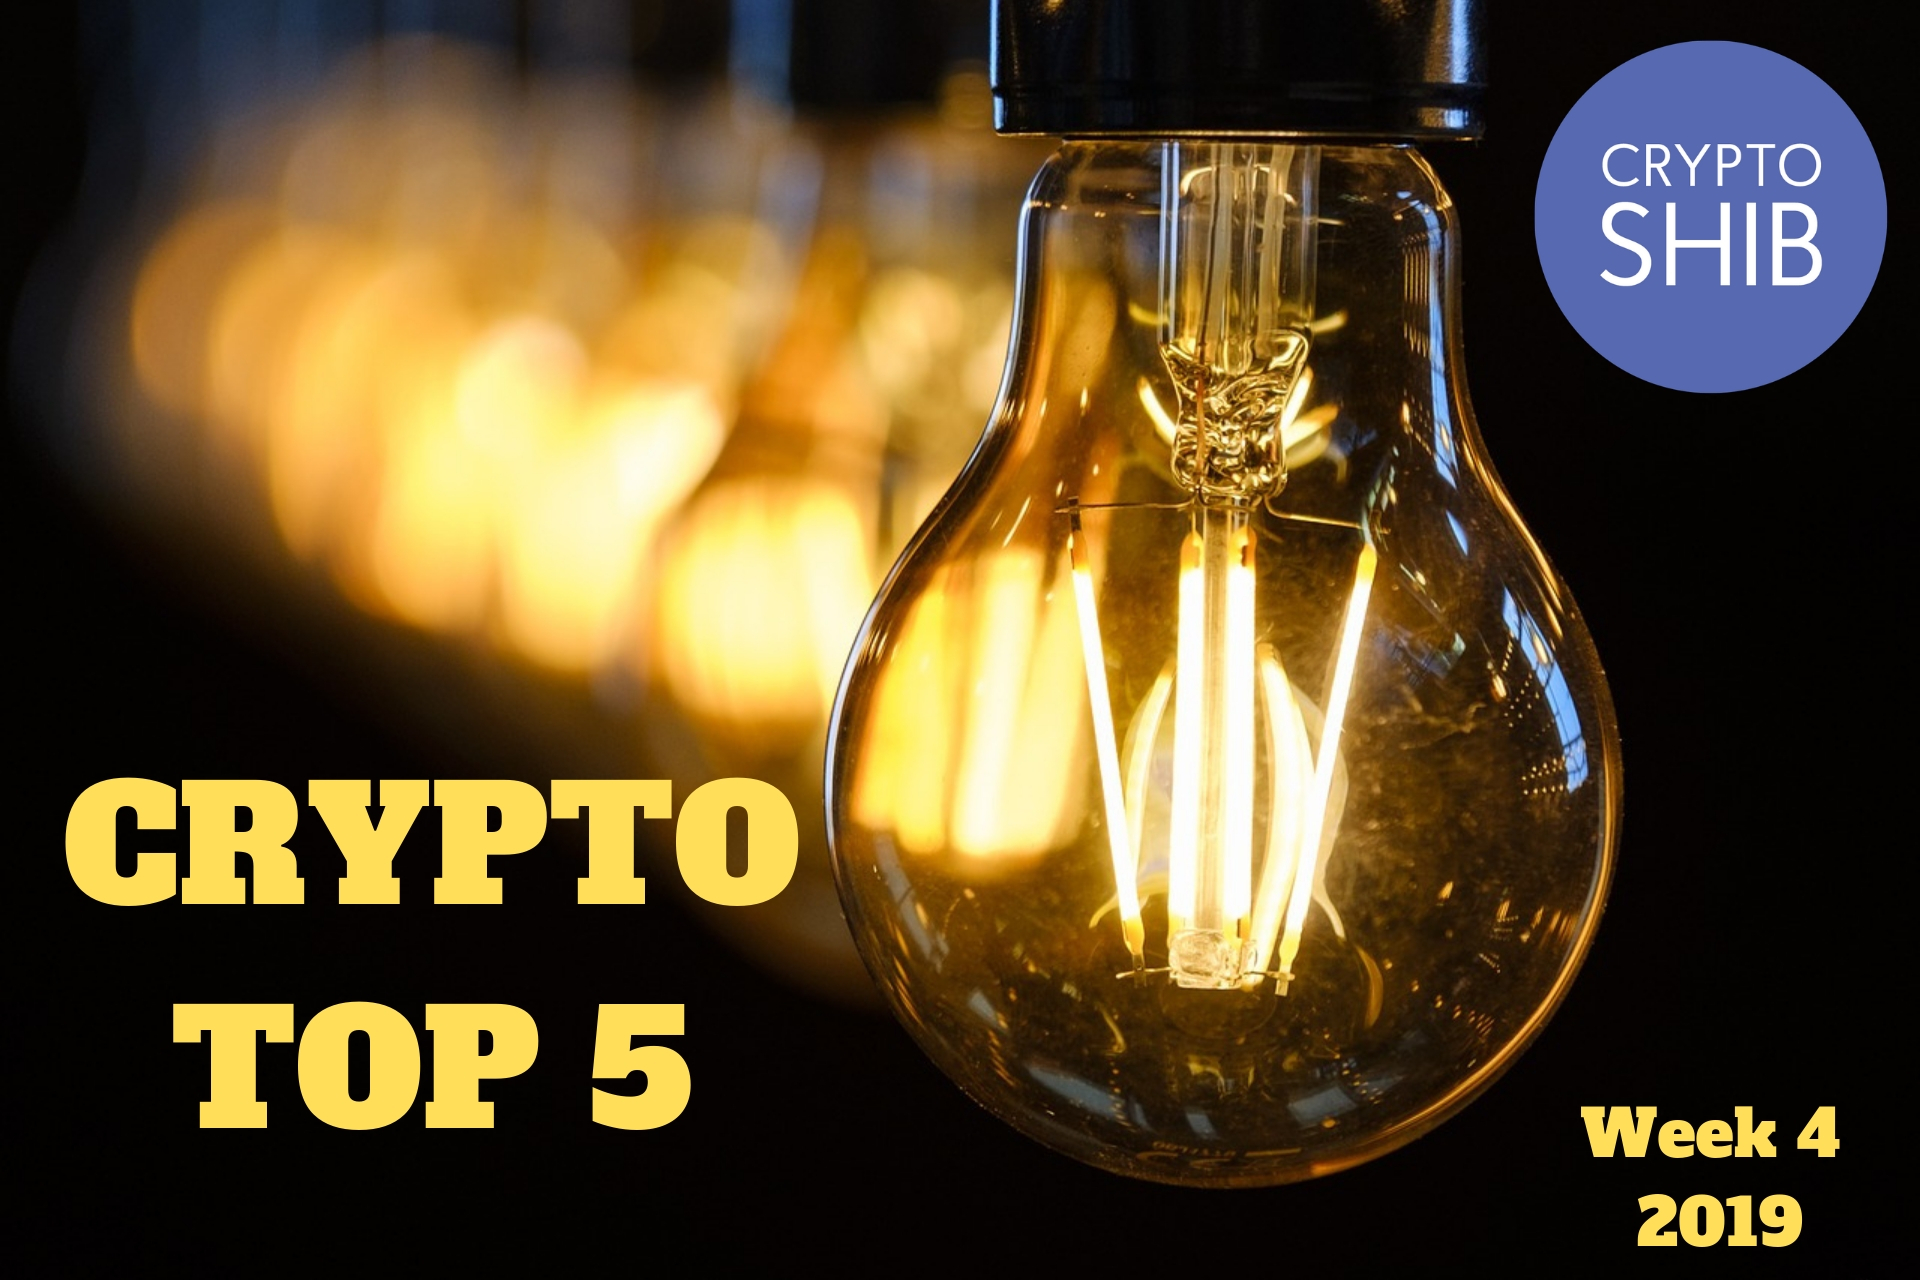 Top Five Crypto Events of the Past Week - Week 4, 2019 - Crypto Shib